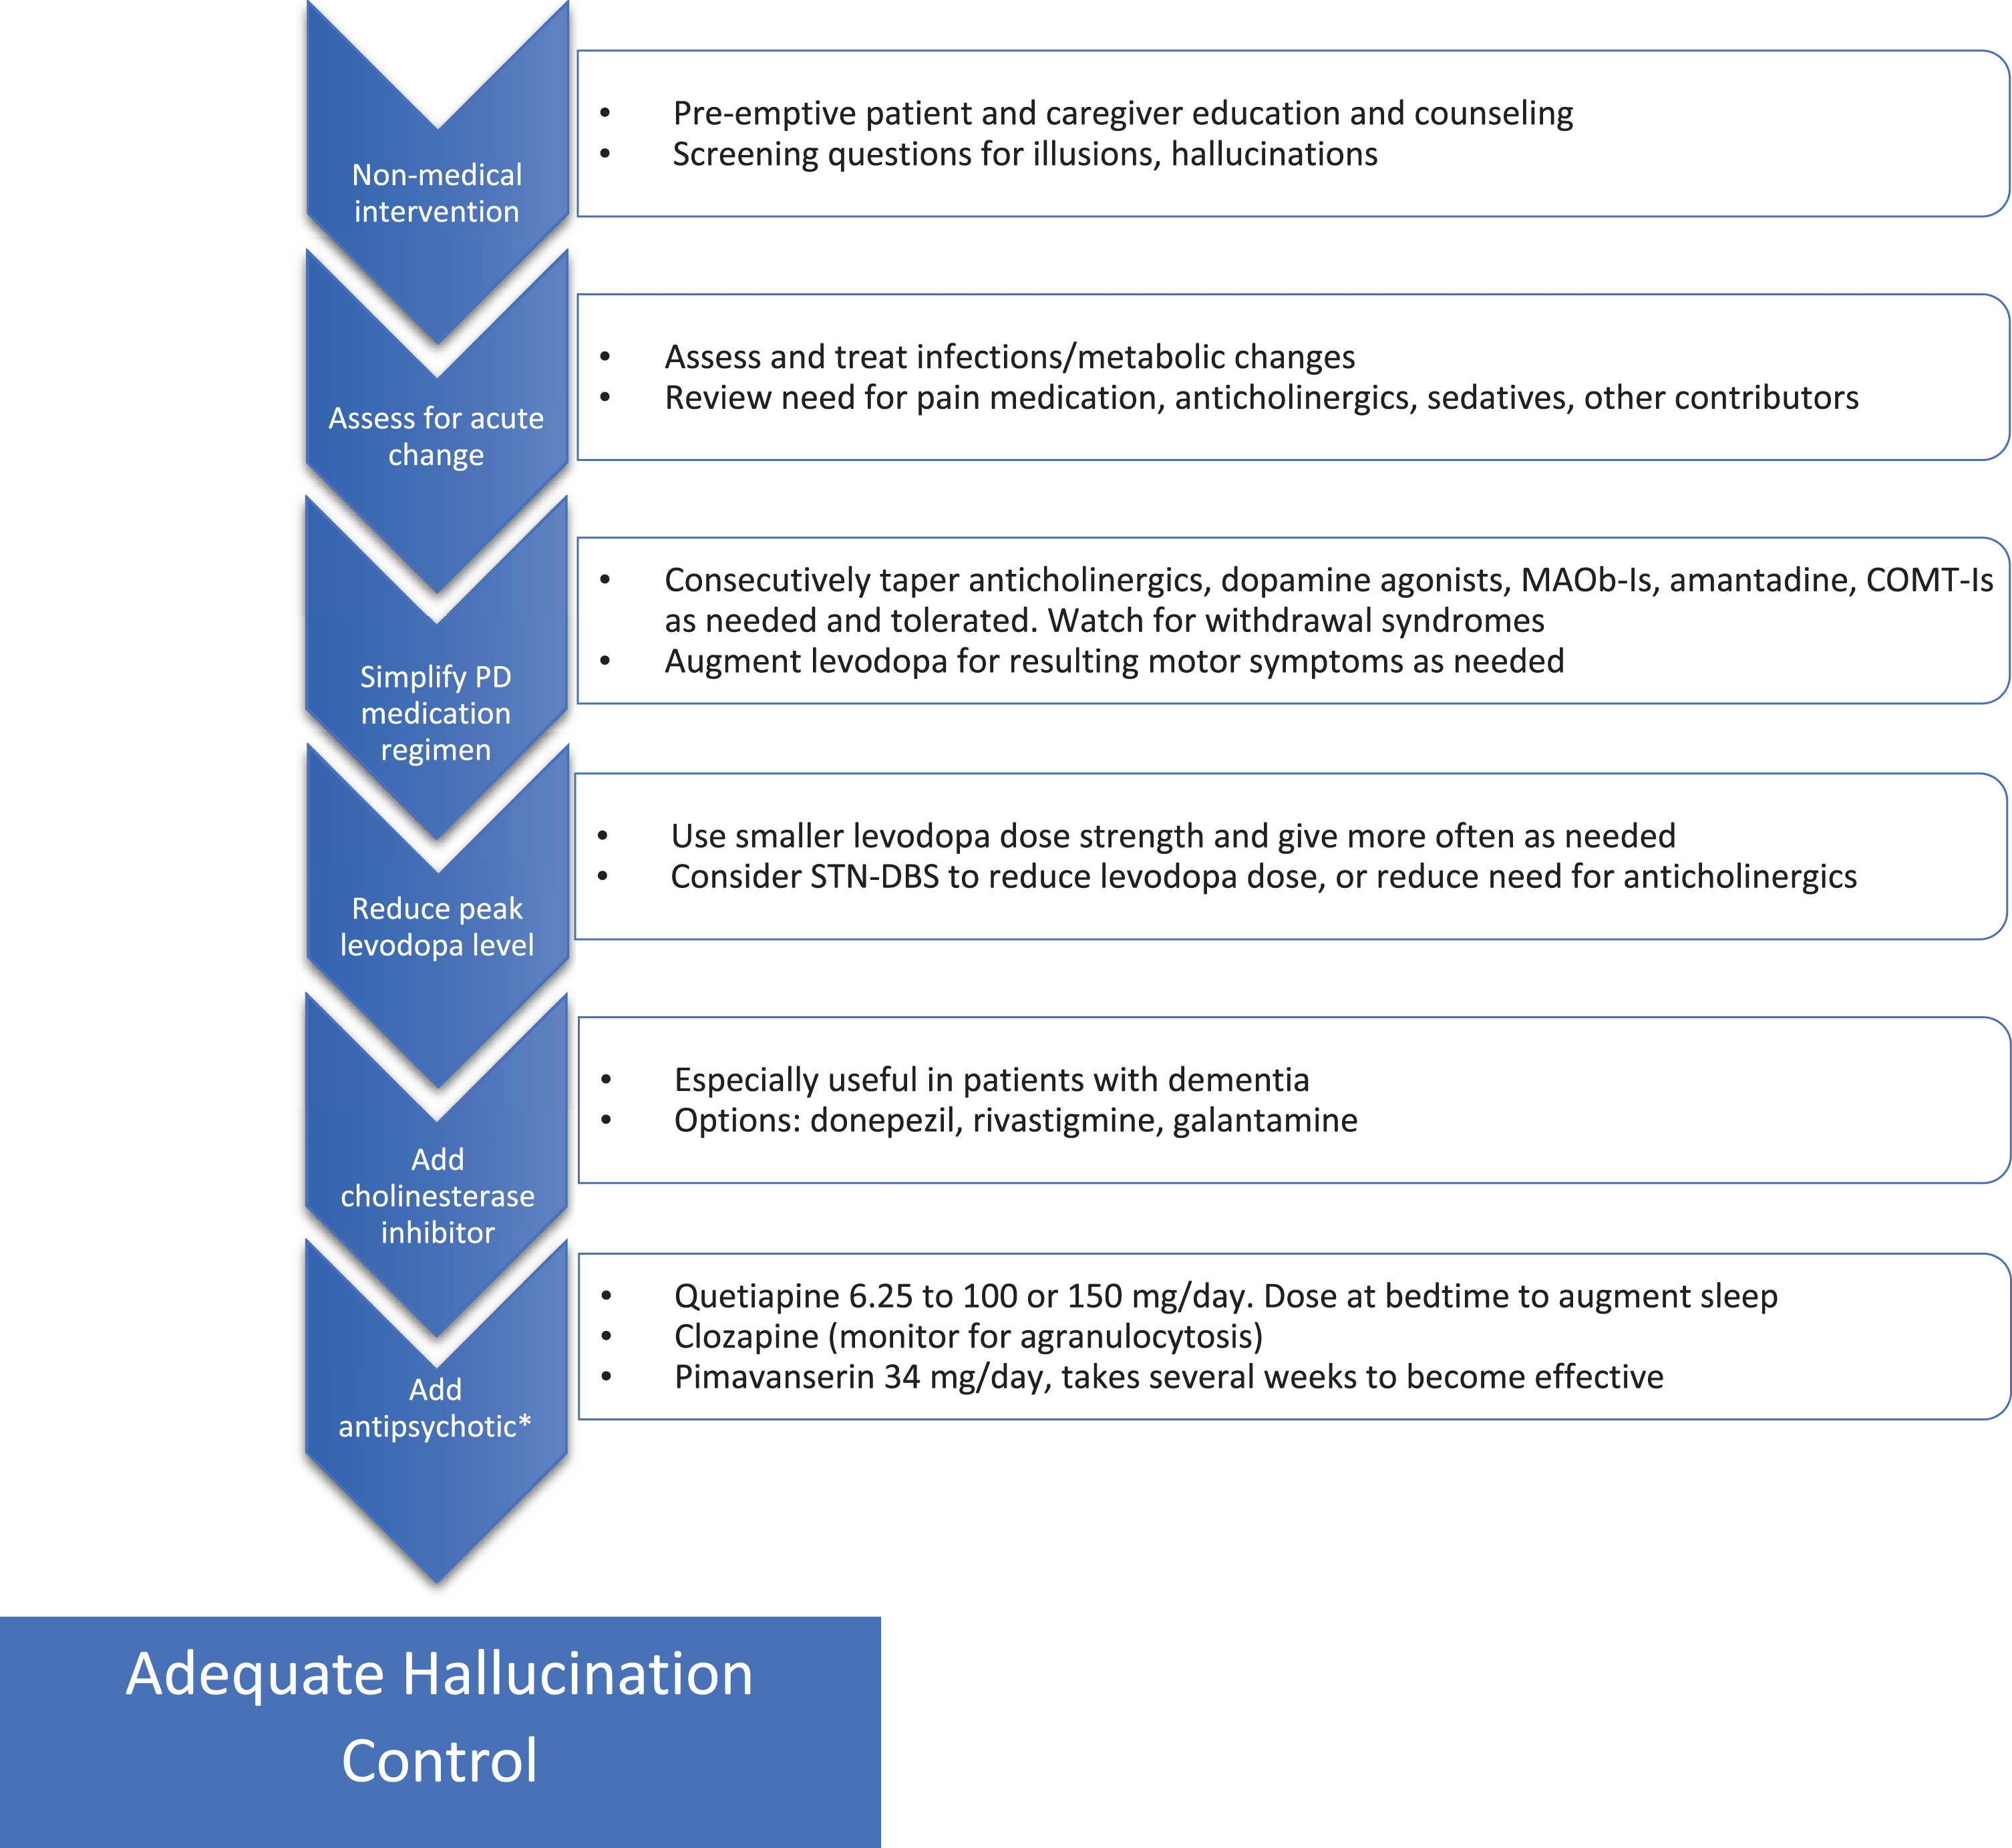 Addressing hallucinations in Parkinson’s disease. Flow chart for stepwise treatment of hallucinations in PD. See text for details and additional warnings. *Use of antipsychotics in patients suffering from dementia must proceed with caution given the black box warning for increased mortality, also QTc should be monitored. MAOb-I, monoamine oxidase B inhibitor; STN-DBS, subthalamic nucleus-deep brain stimulation; COMT-I, catechol-O-methyltransferase inhibitor.